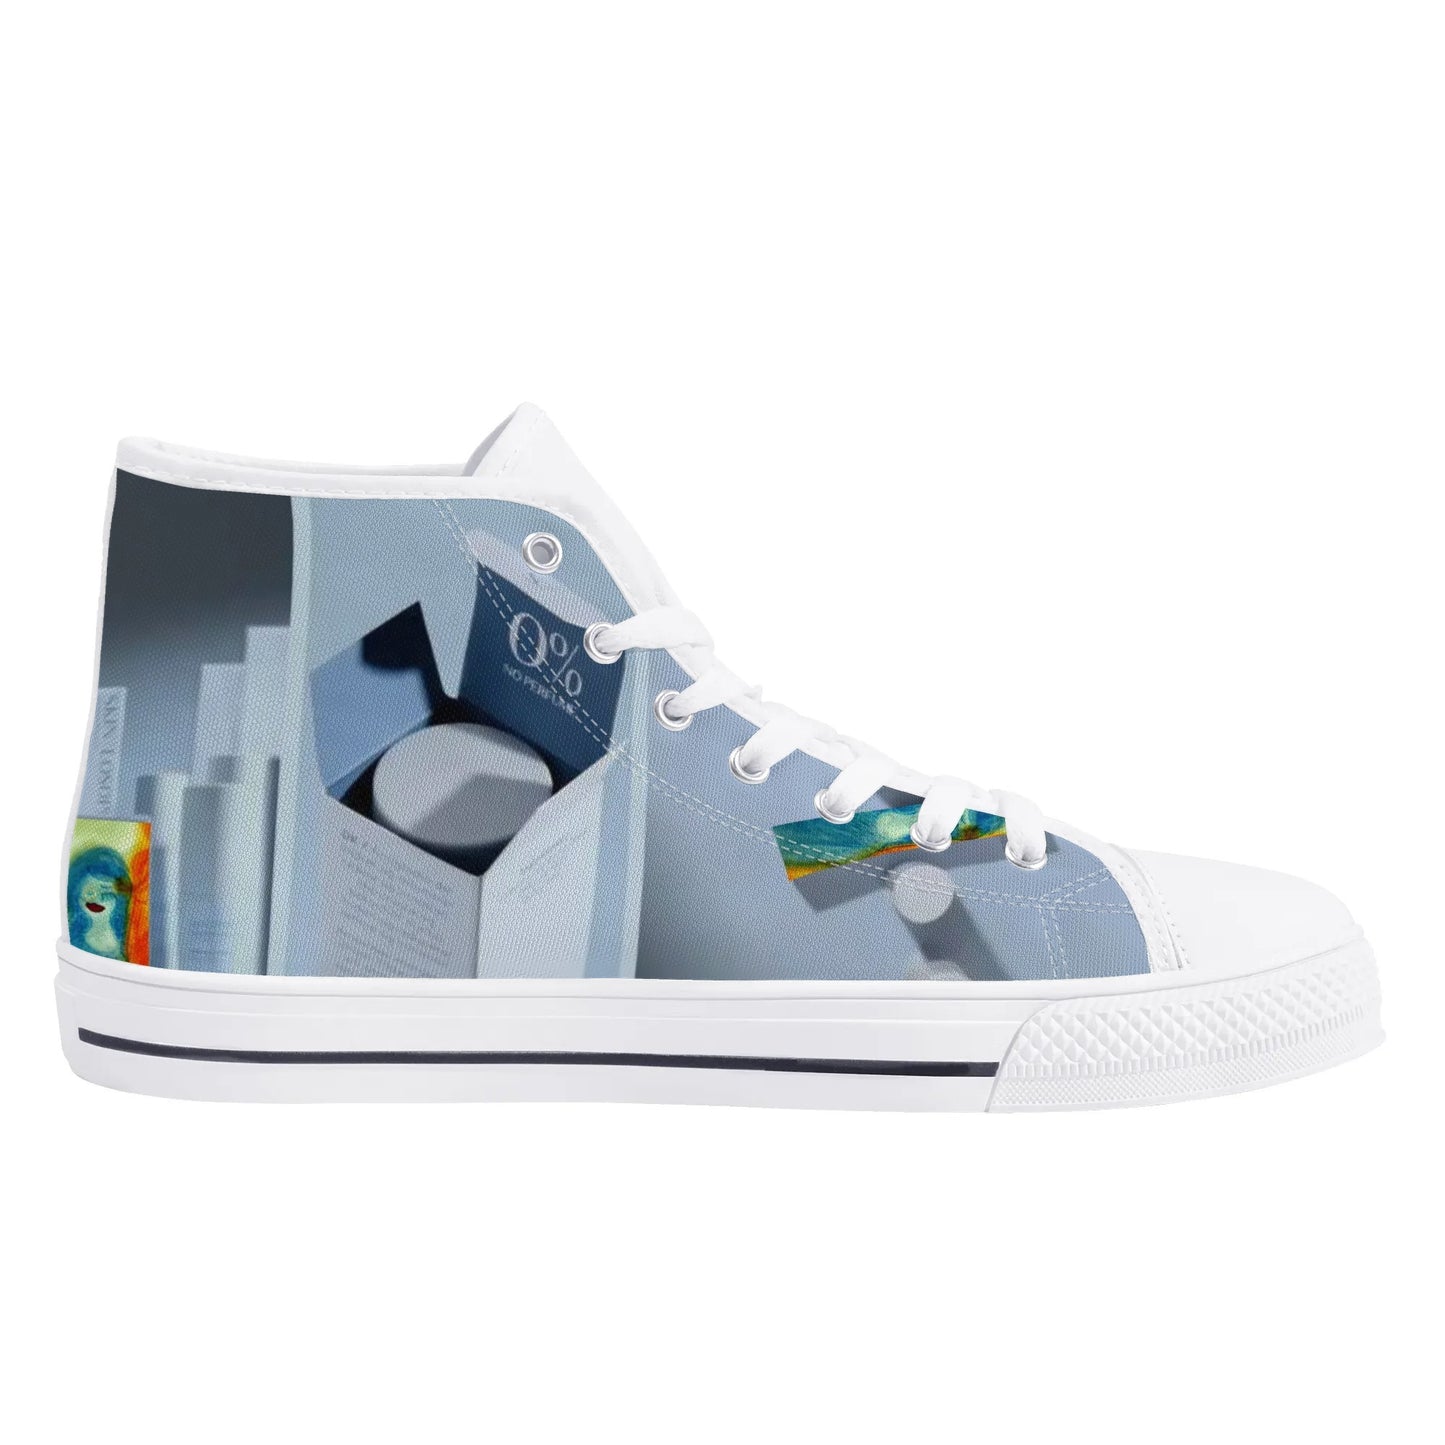 Let Me Design Your Company Canvas Sneakers